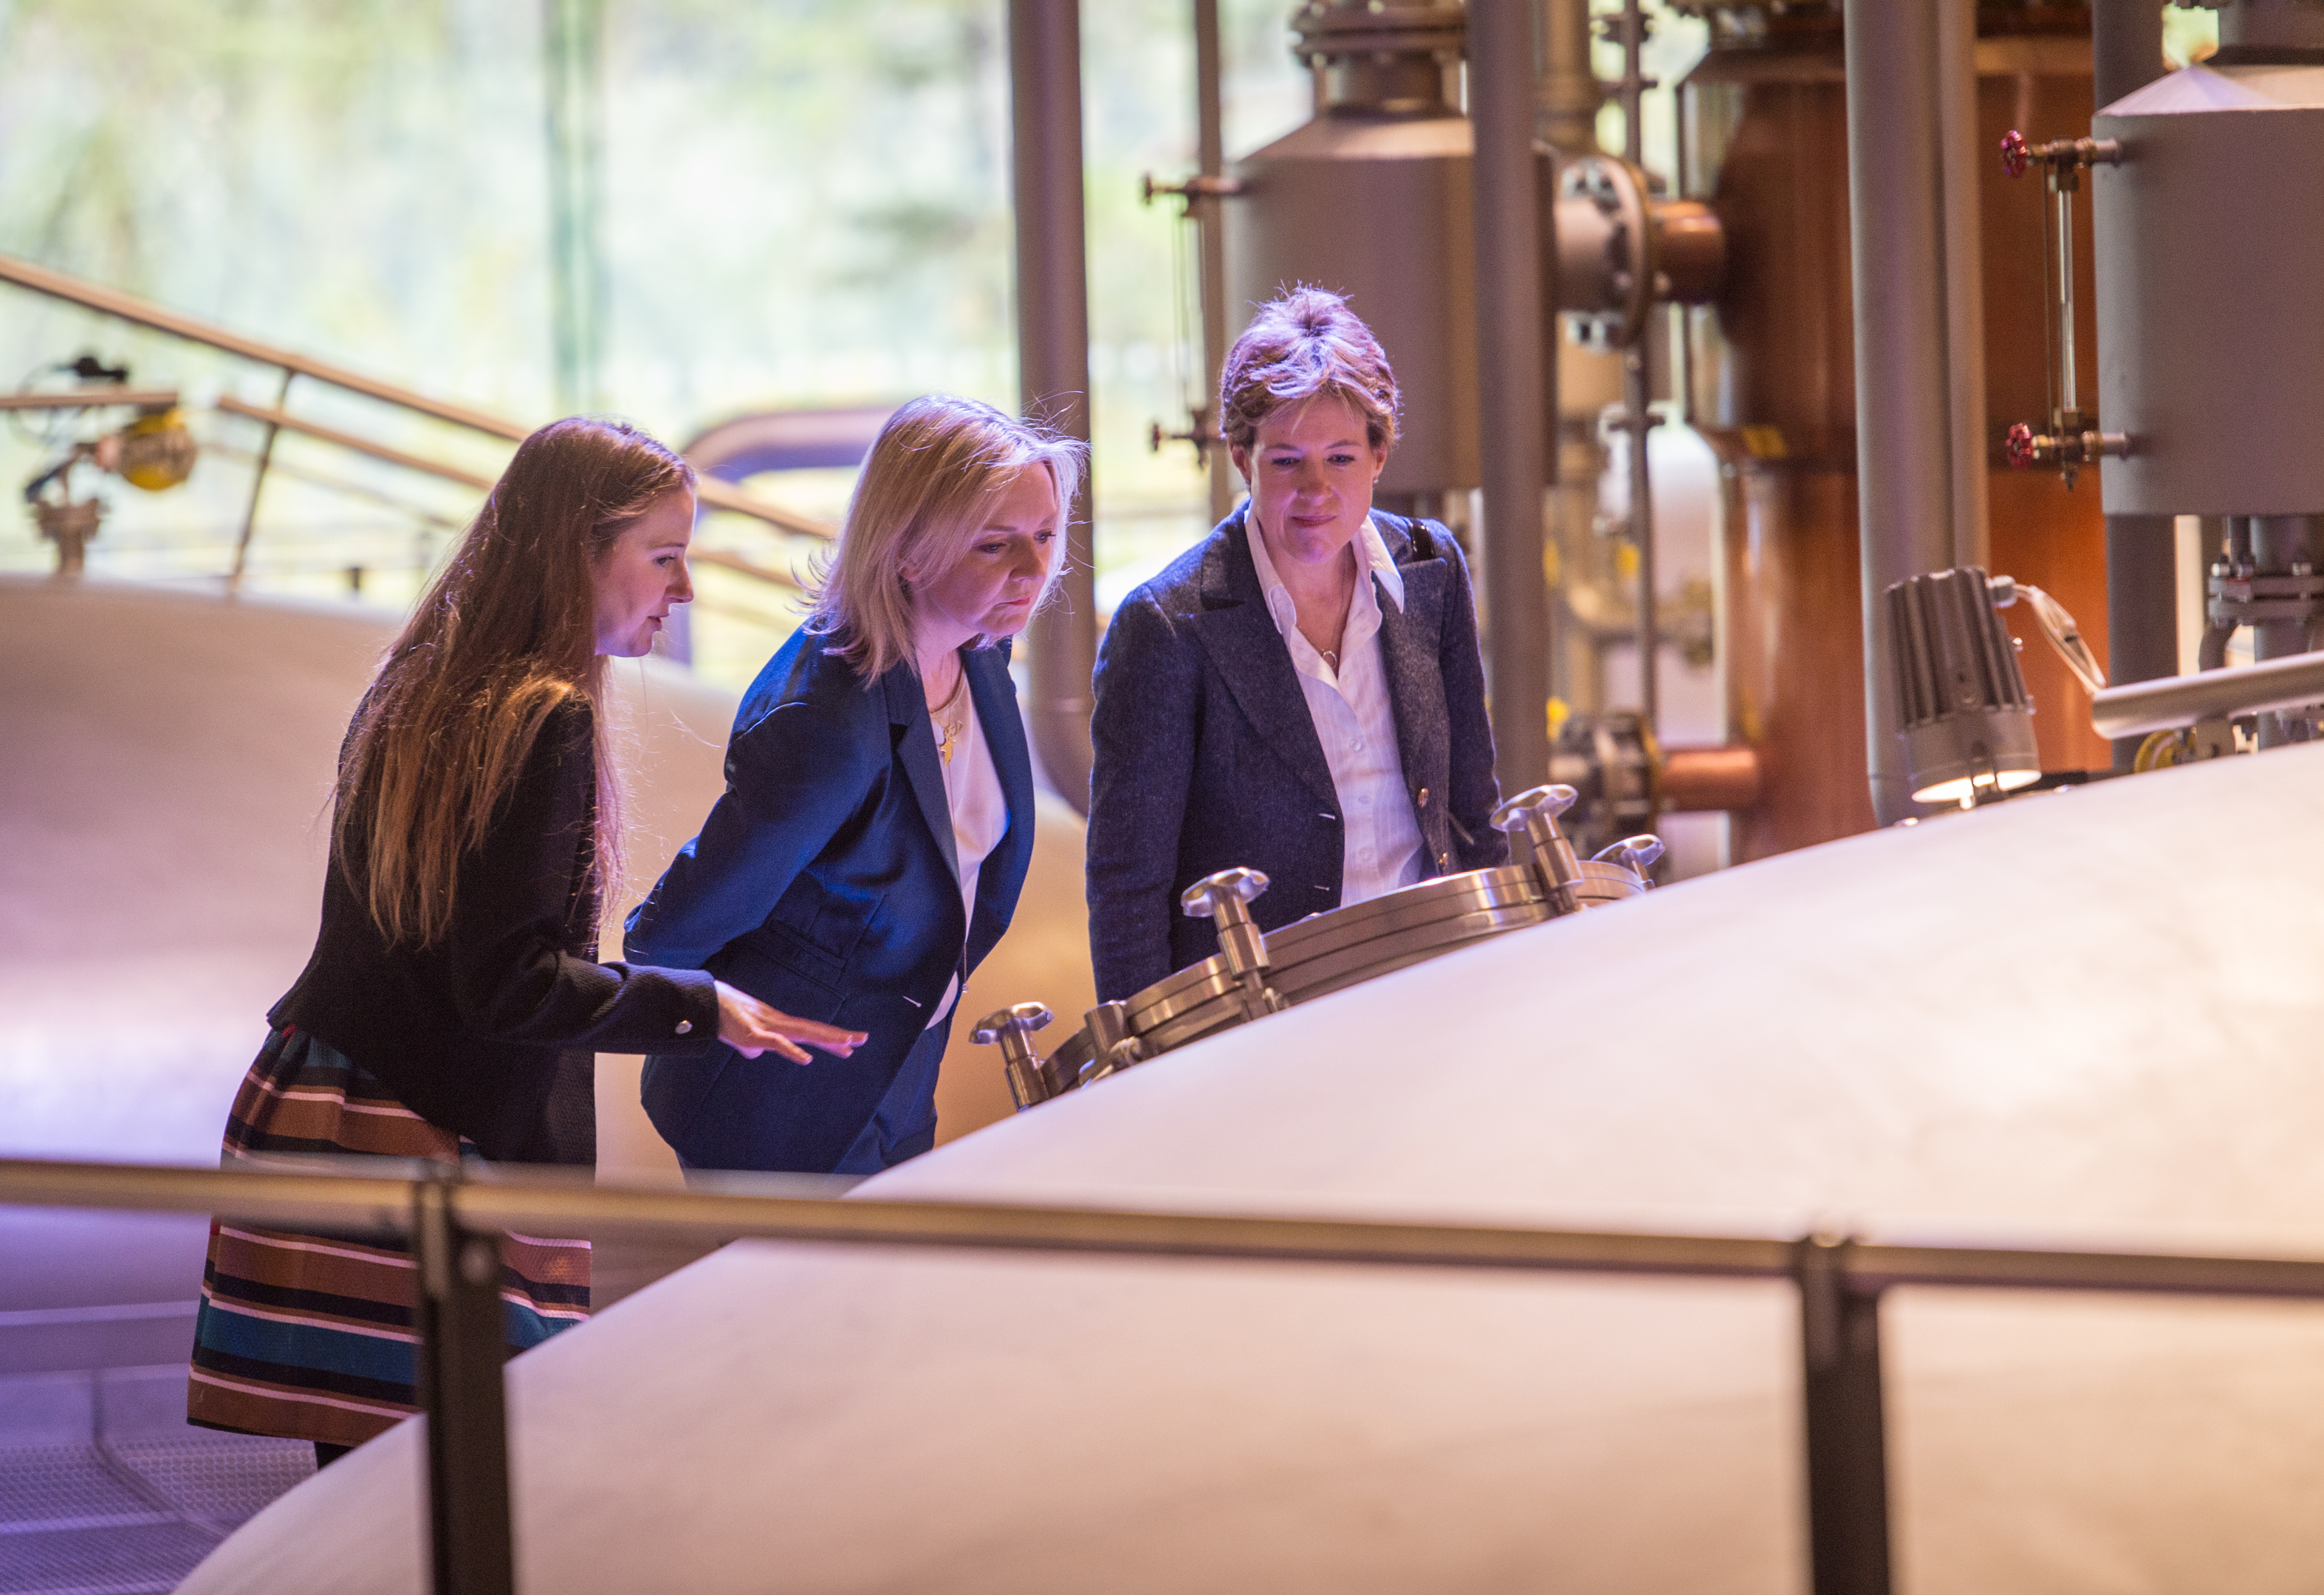 Karen Betts, chief executive of the Scotch Whisky Association, pictured right, toured Macallan with the Chief Secretary to the Treasury, Liz Truss, pictured middle.